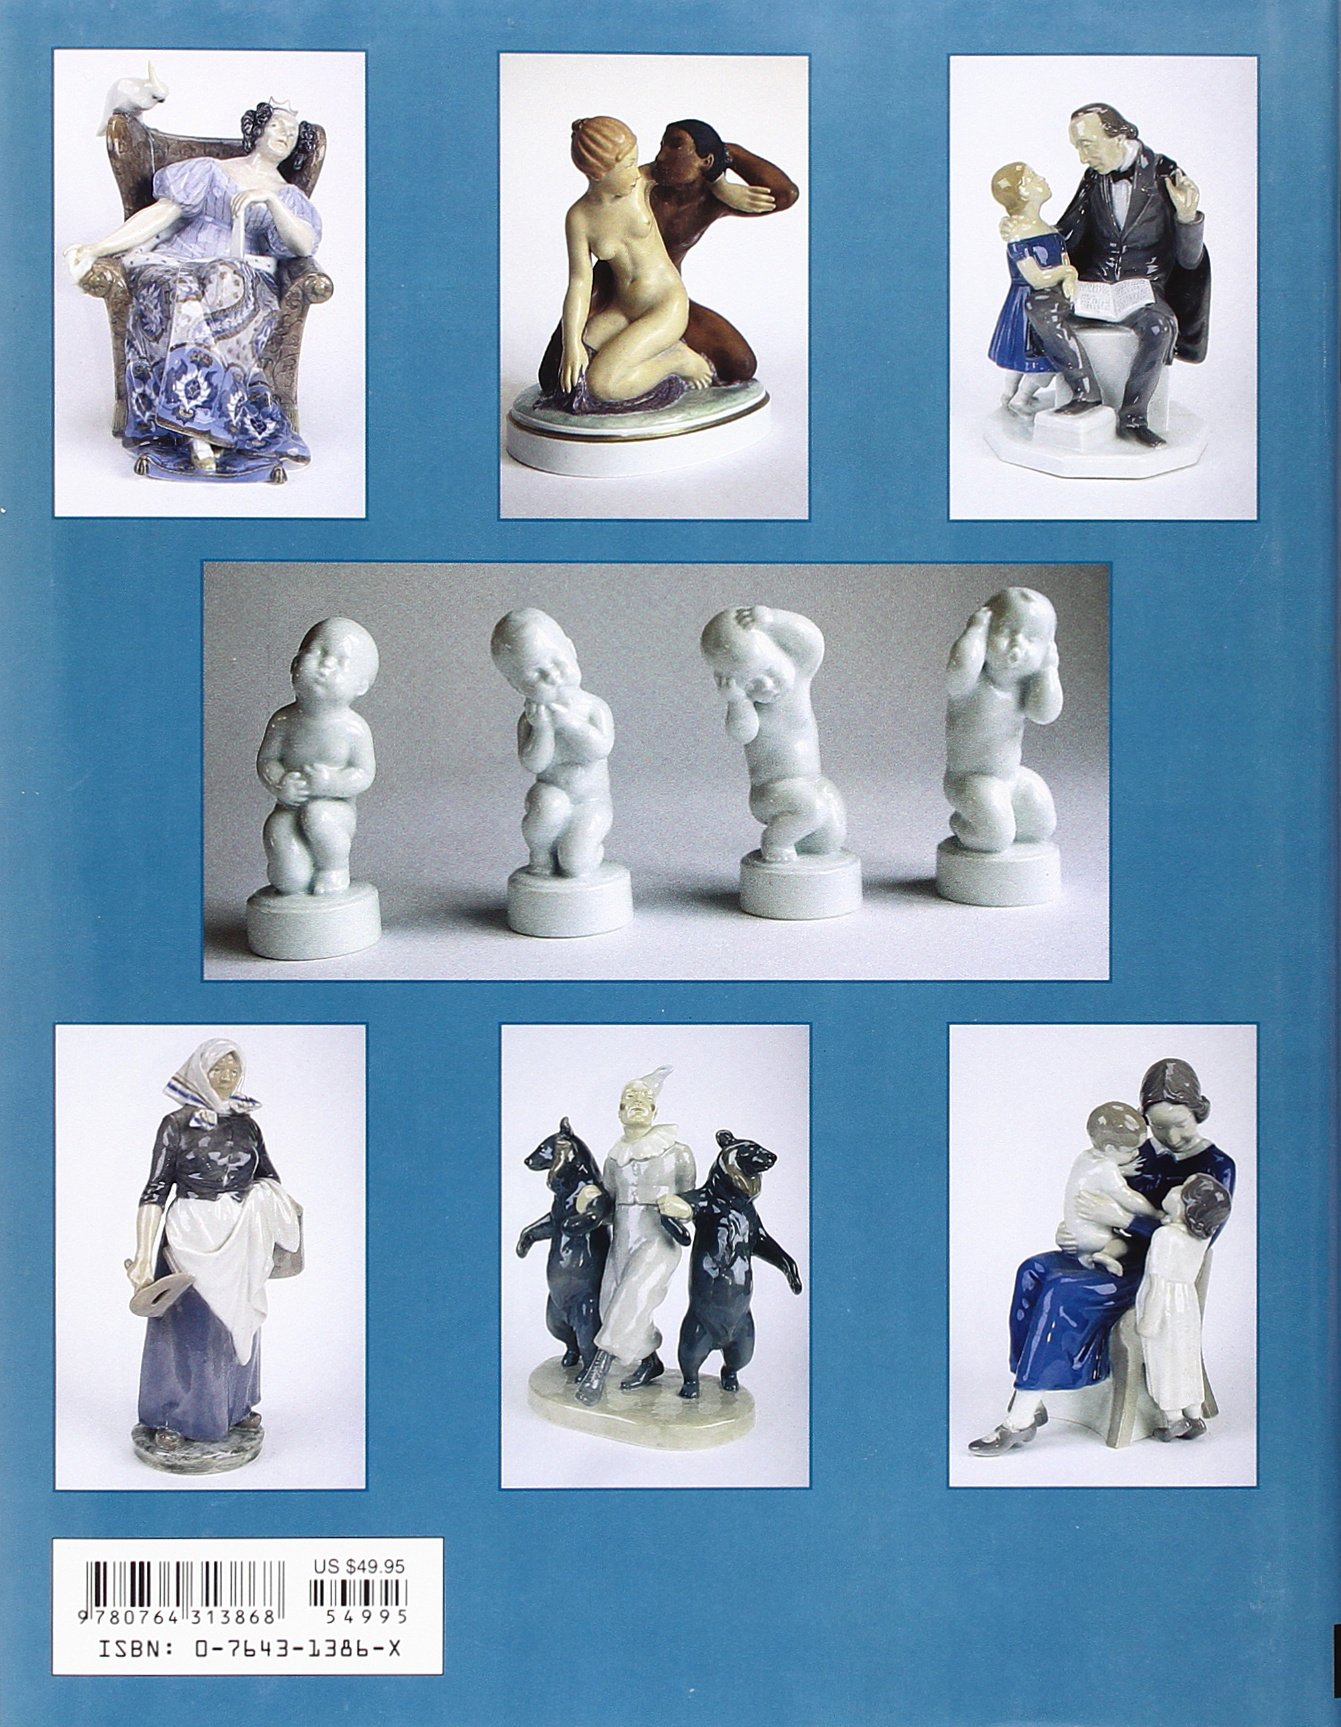 A Collectoras Guide to Royal Copenhagen Porcelain (英语) 精装 – 2001年7月27日 by Nick Pope